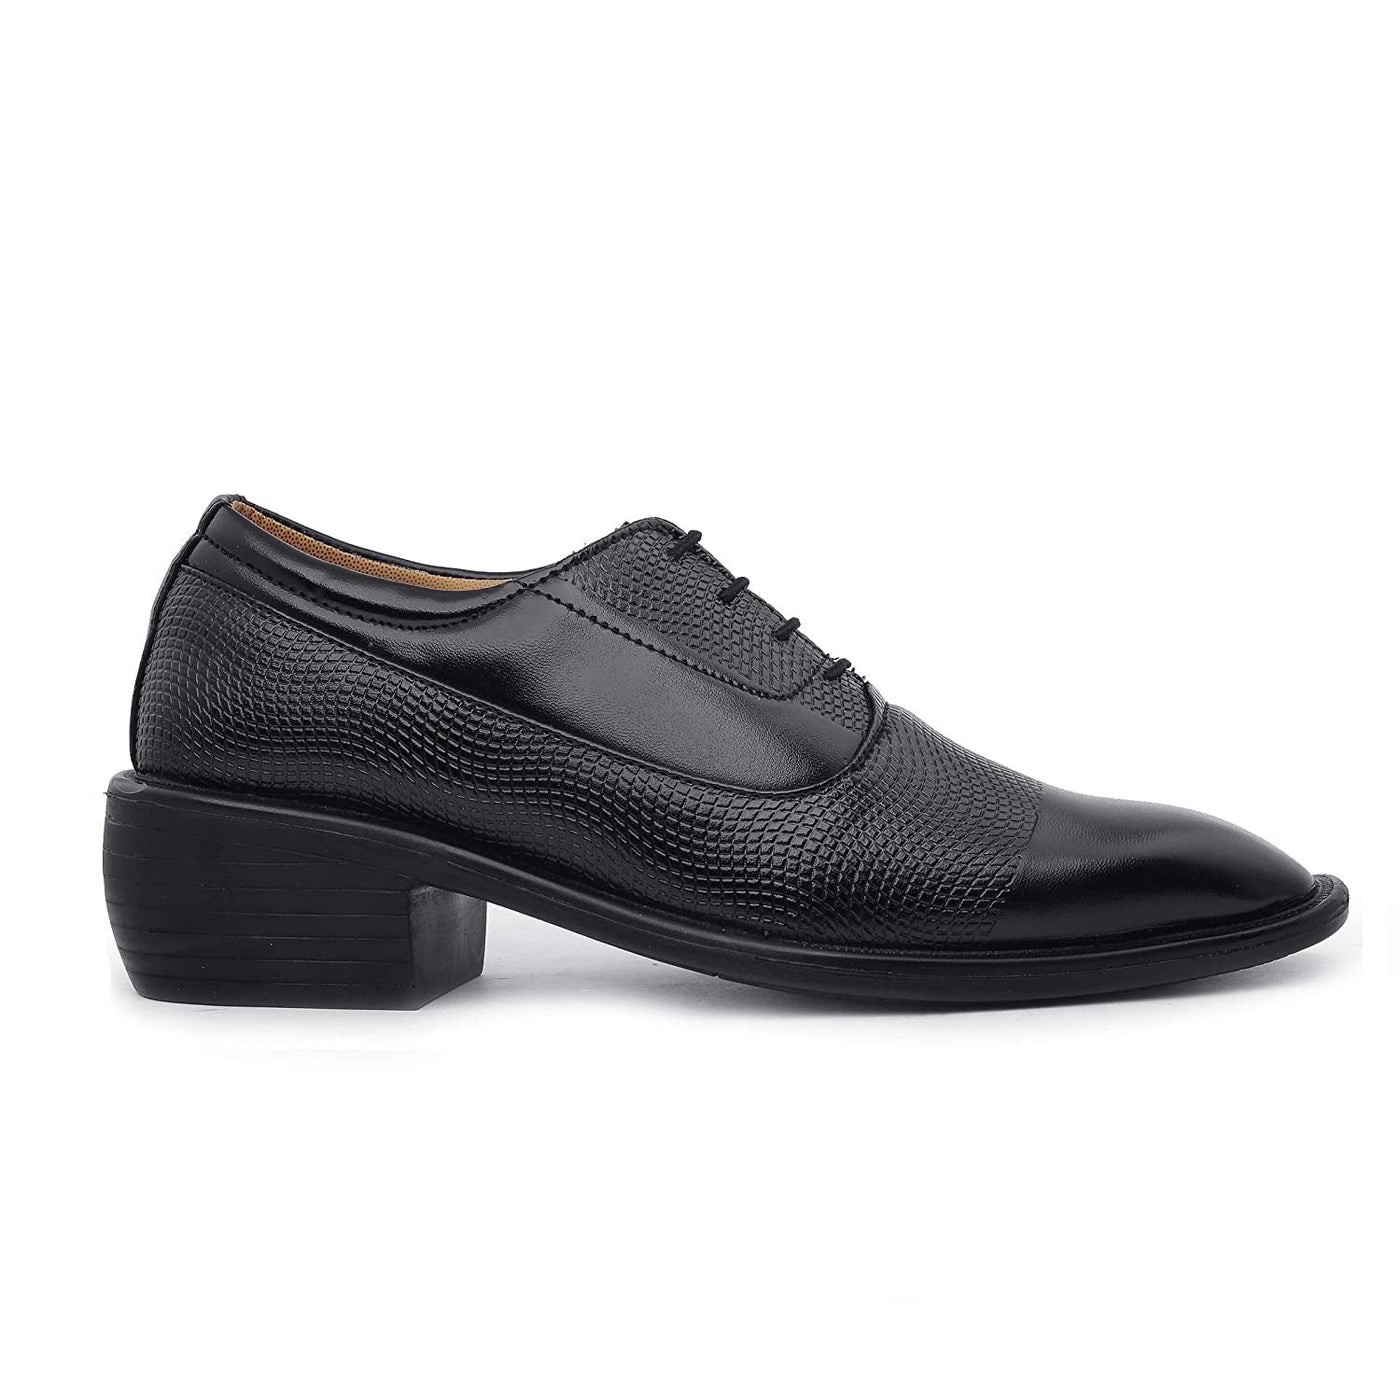 Classy Casual And Formal Business Wear Black Lace-Up Shoes-Unique and Classy